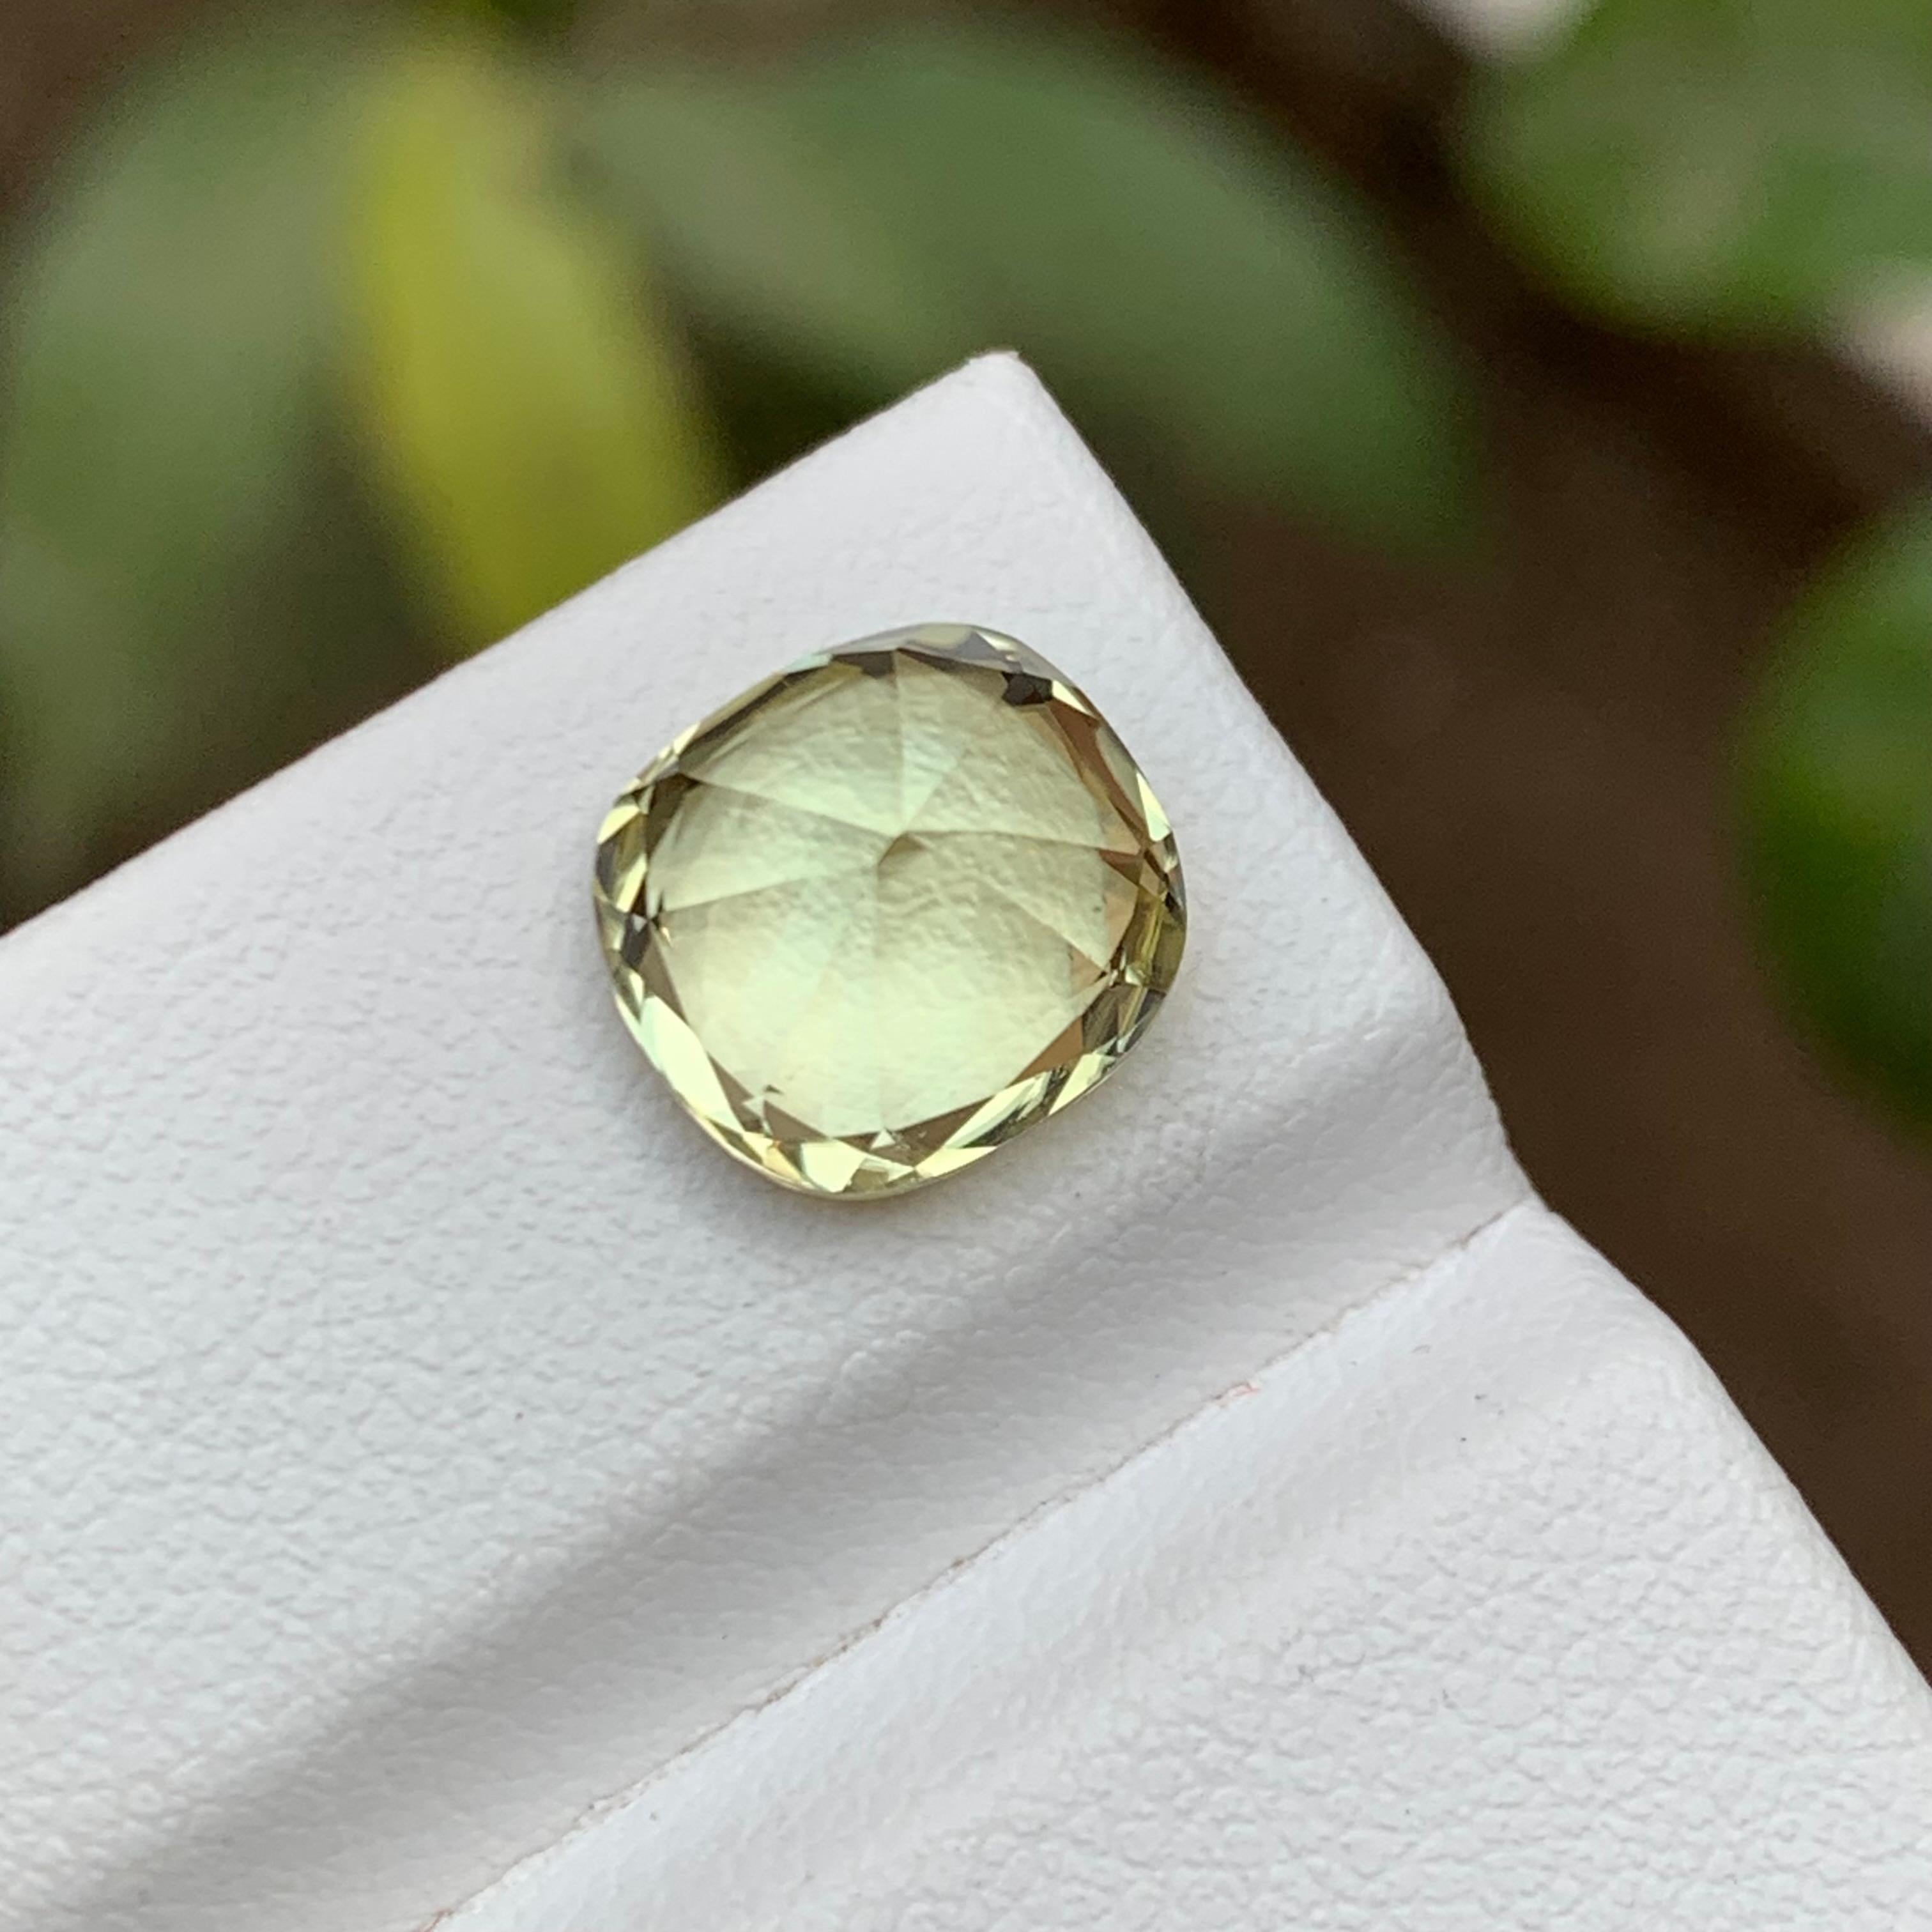 Rare Light Golden Yellow Natural Tourmaline Gemstone 4.15Ct Cushion Cut for Ring For Sale 2